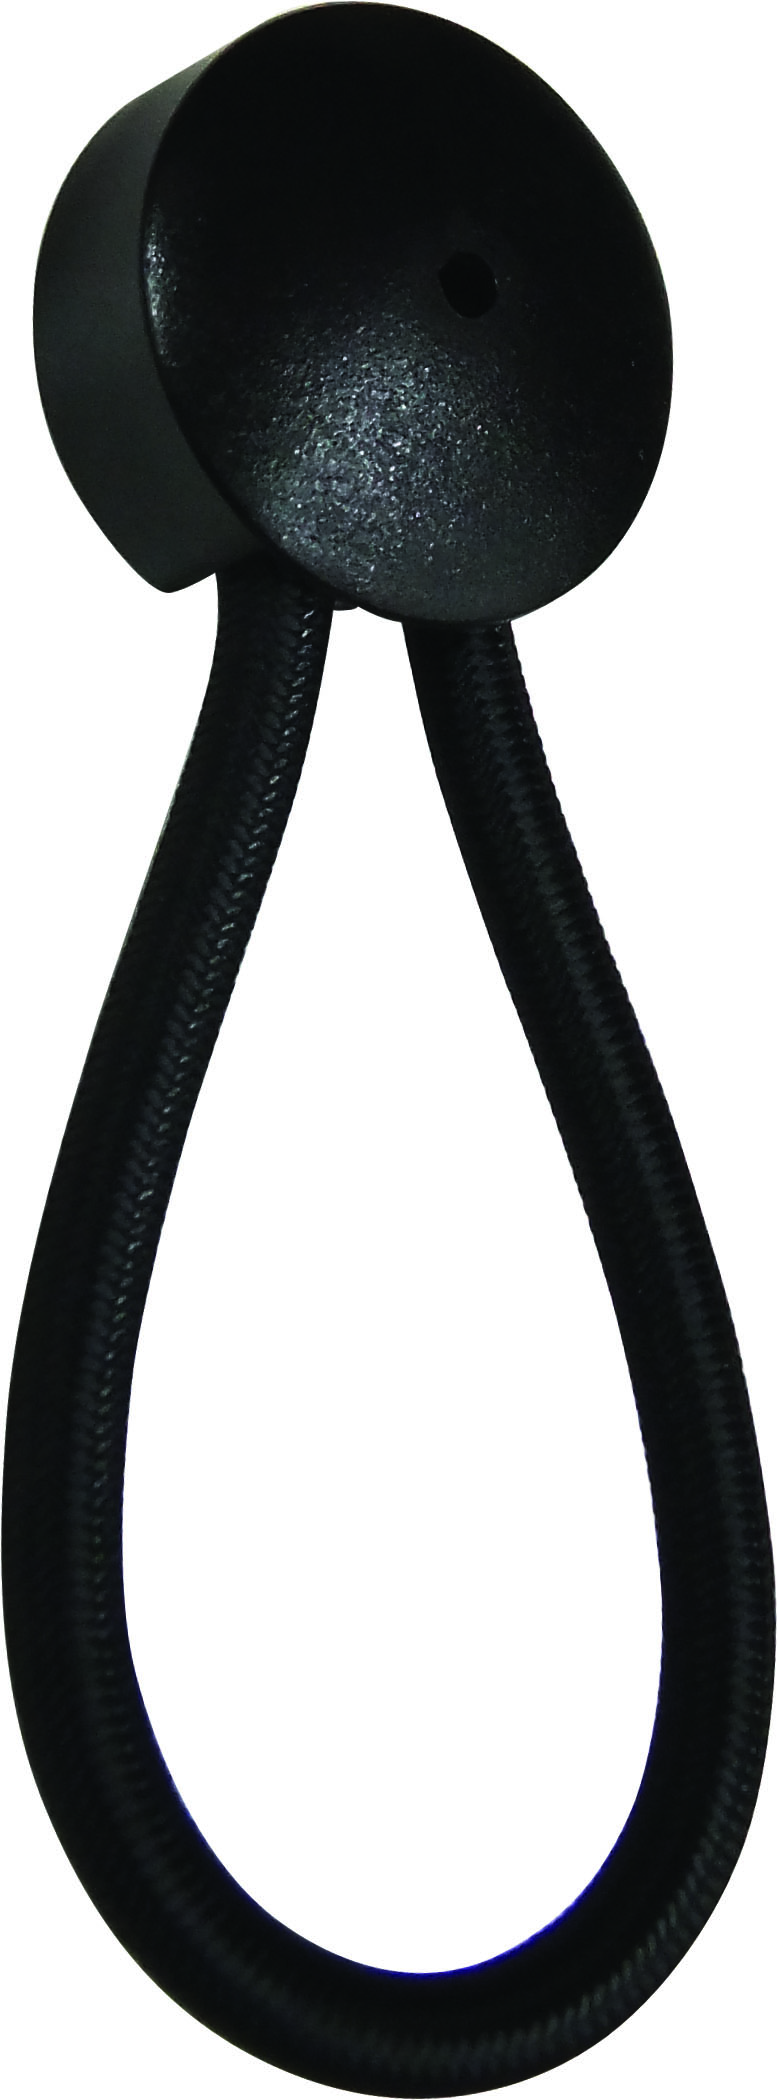 Canvas Shock Cord Loops (25286) - Online Boating Store - Boat Parts